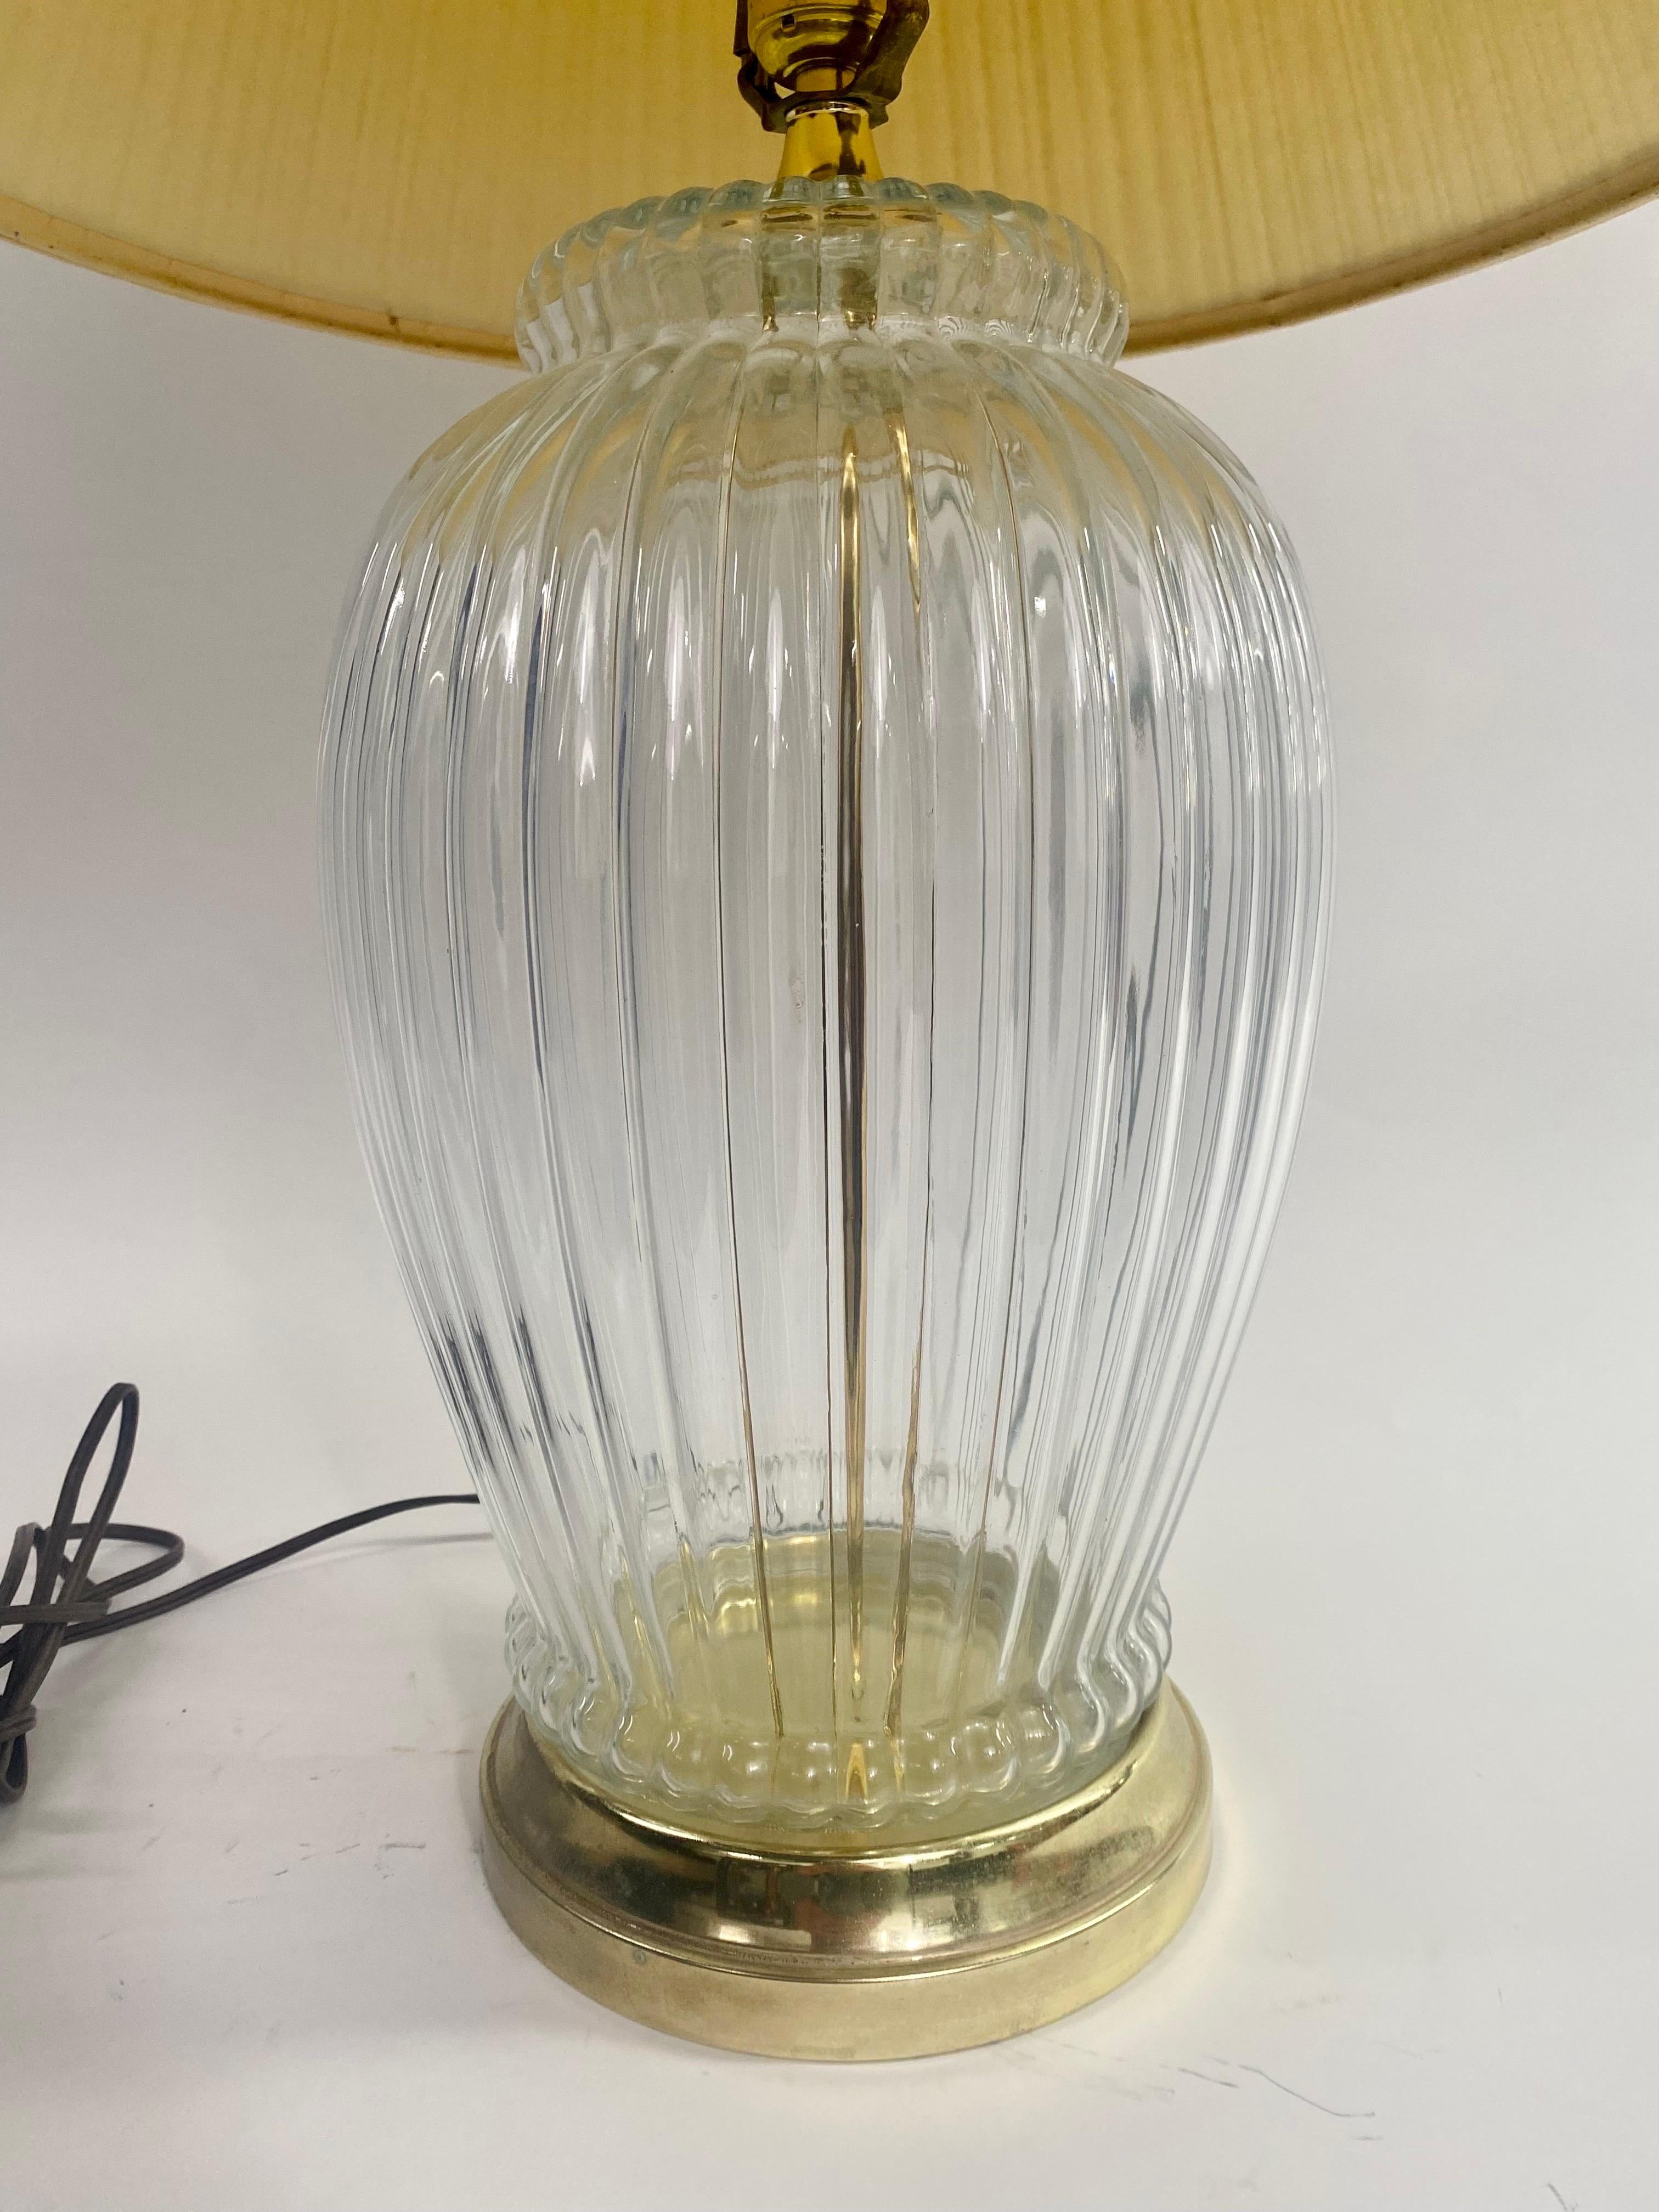 An elegant Hollywood Regency style table lamp featuring a pleated glass oval body. A brass rod attaching the socket to the round solid brass base. The mid-century table lamp is classy and will elevate the style of any room. The lamp takes one